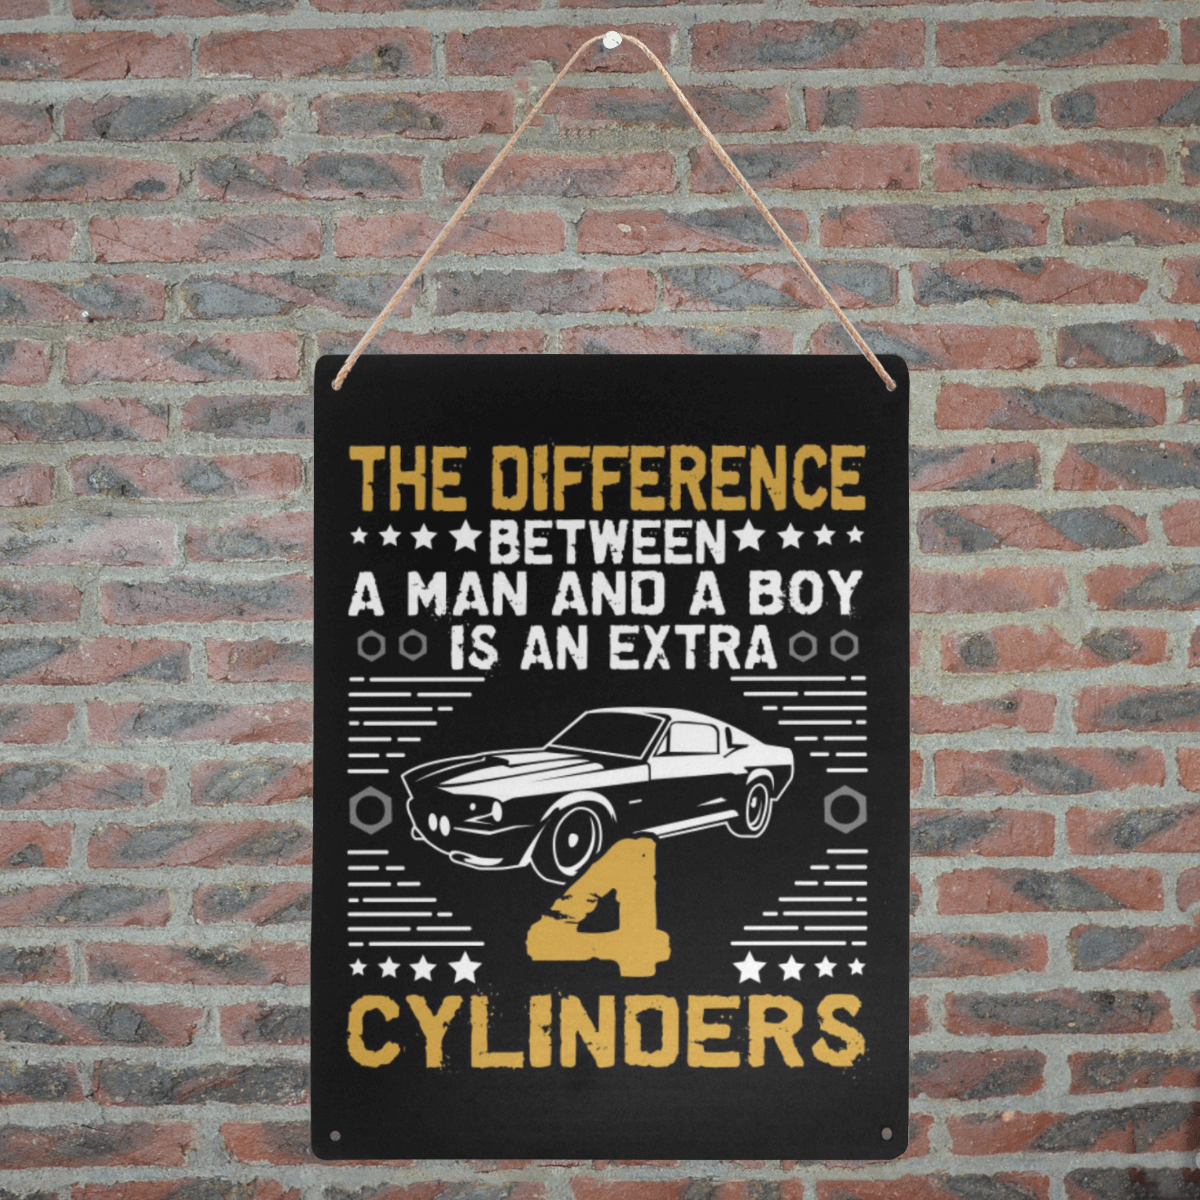 Difference Between A Man And A Boy Is 4 Cylinders Metal Tin Sign 12"x16"